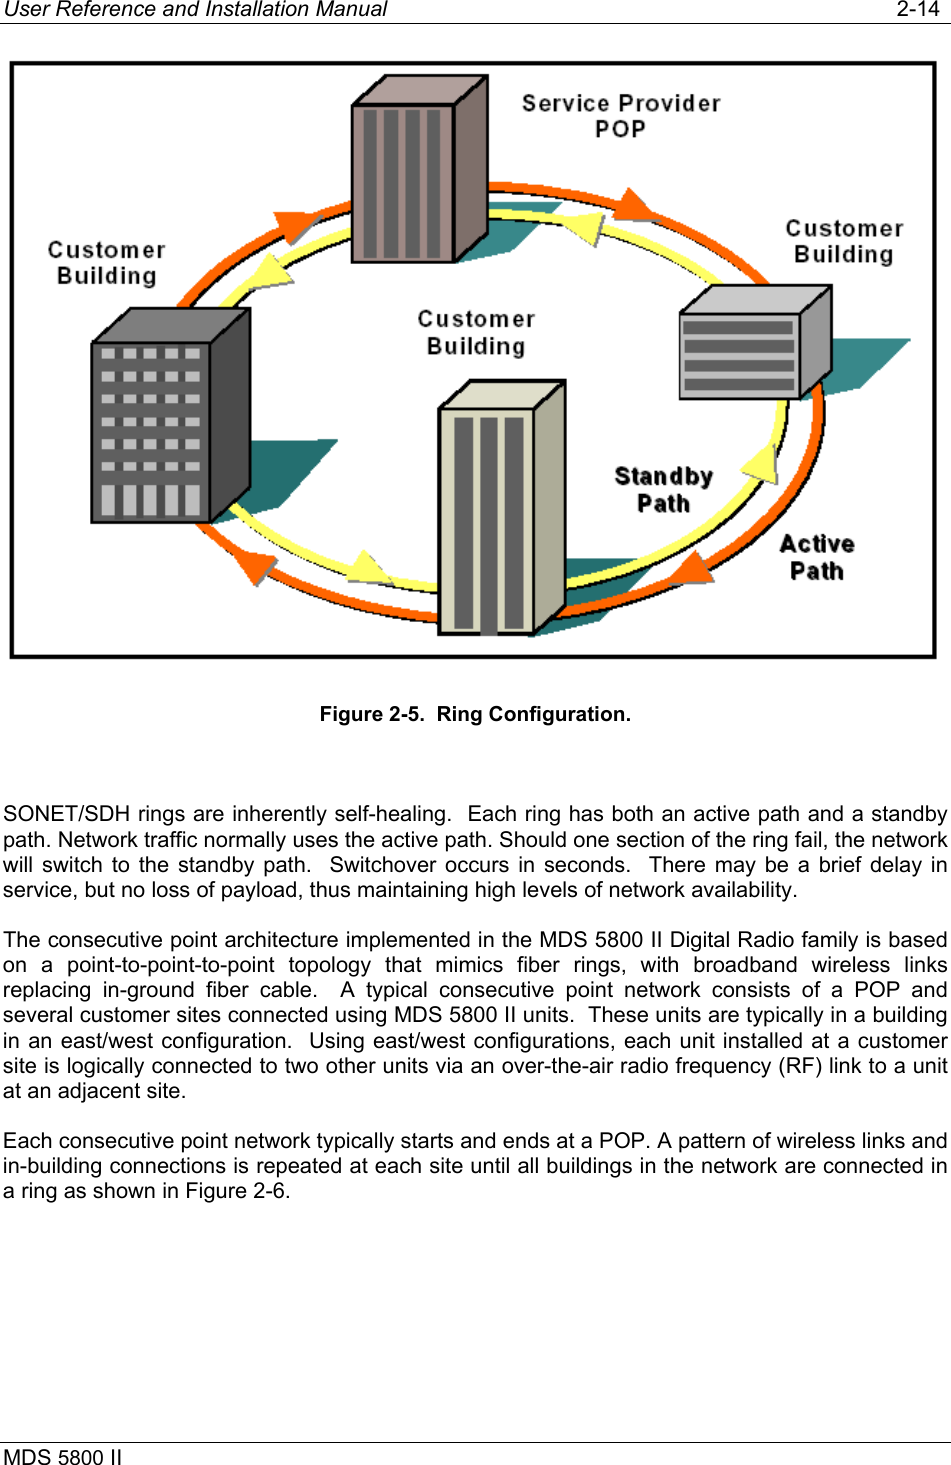 User Reference and Installation Manual   2-14 MDS 5800 II       Figure 2-5.  Ring Configuration.  SONET/SDH rings are inherently self-healing.  Each ring has both an active path and a standby path. Network traffic normally uses the active path. Should one section of the ring fail, the network will switch to the standby path.  Switchover occurs in seconds.  There may be a brief delay in service, but no loss of payload, thus maintaining high levels of network availability. The consecutive point architecture implemented in the MDS 5800 II Digital Radio family is based on a point-to-point-to-point topology that mimics fiber rings, with broadband wireless links replacing in-ground fiber cable.  A typical consecutive point network consists of a POP and several customer sites connected using MDS 5800 II units.  These units are typically in a building in an east/west configuration.  Using east/west configurations, each unit installed at a customer site is logically connected to two other units via an over-the-air radio frequency (RF) link to a unit at an adjacent site. Each consecutive point network typically starts and ends at a POP. A pattern of wireless links and in-building connections is repeated at each site until all buildings in the network are connected in a ring as shown in Figure 2-6.  